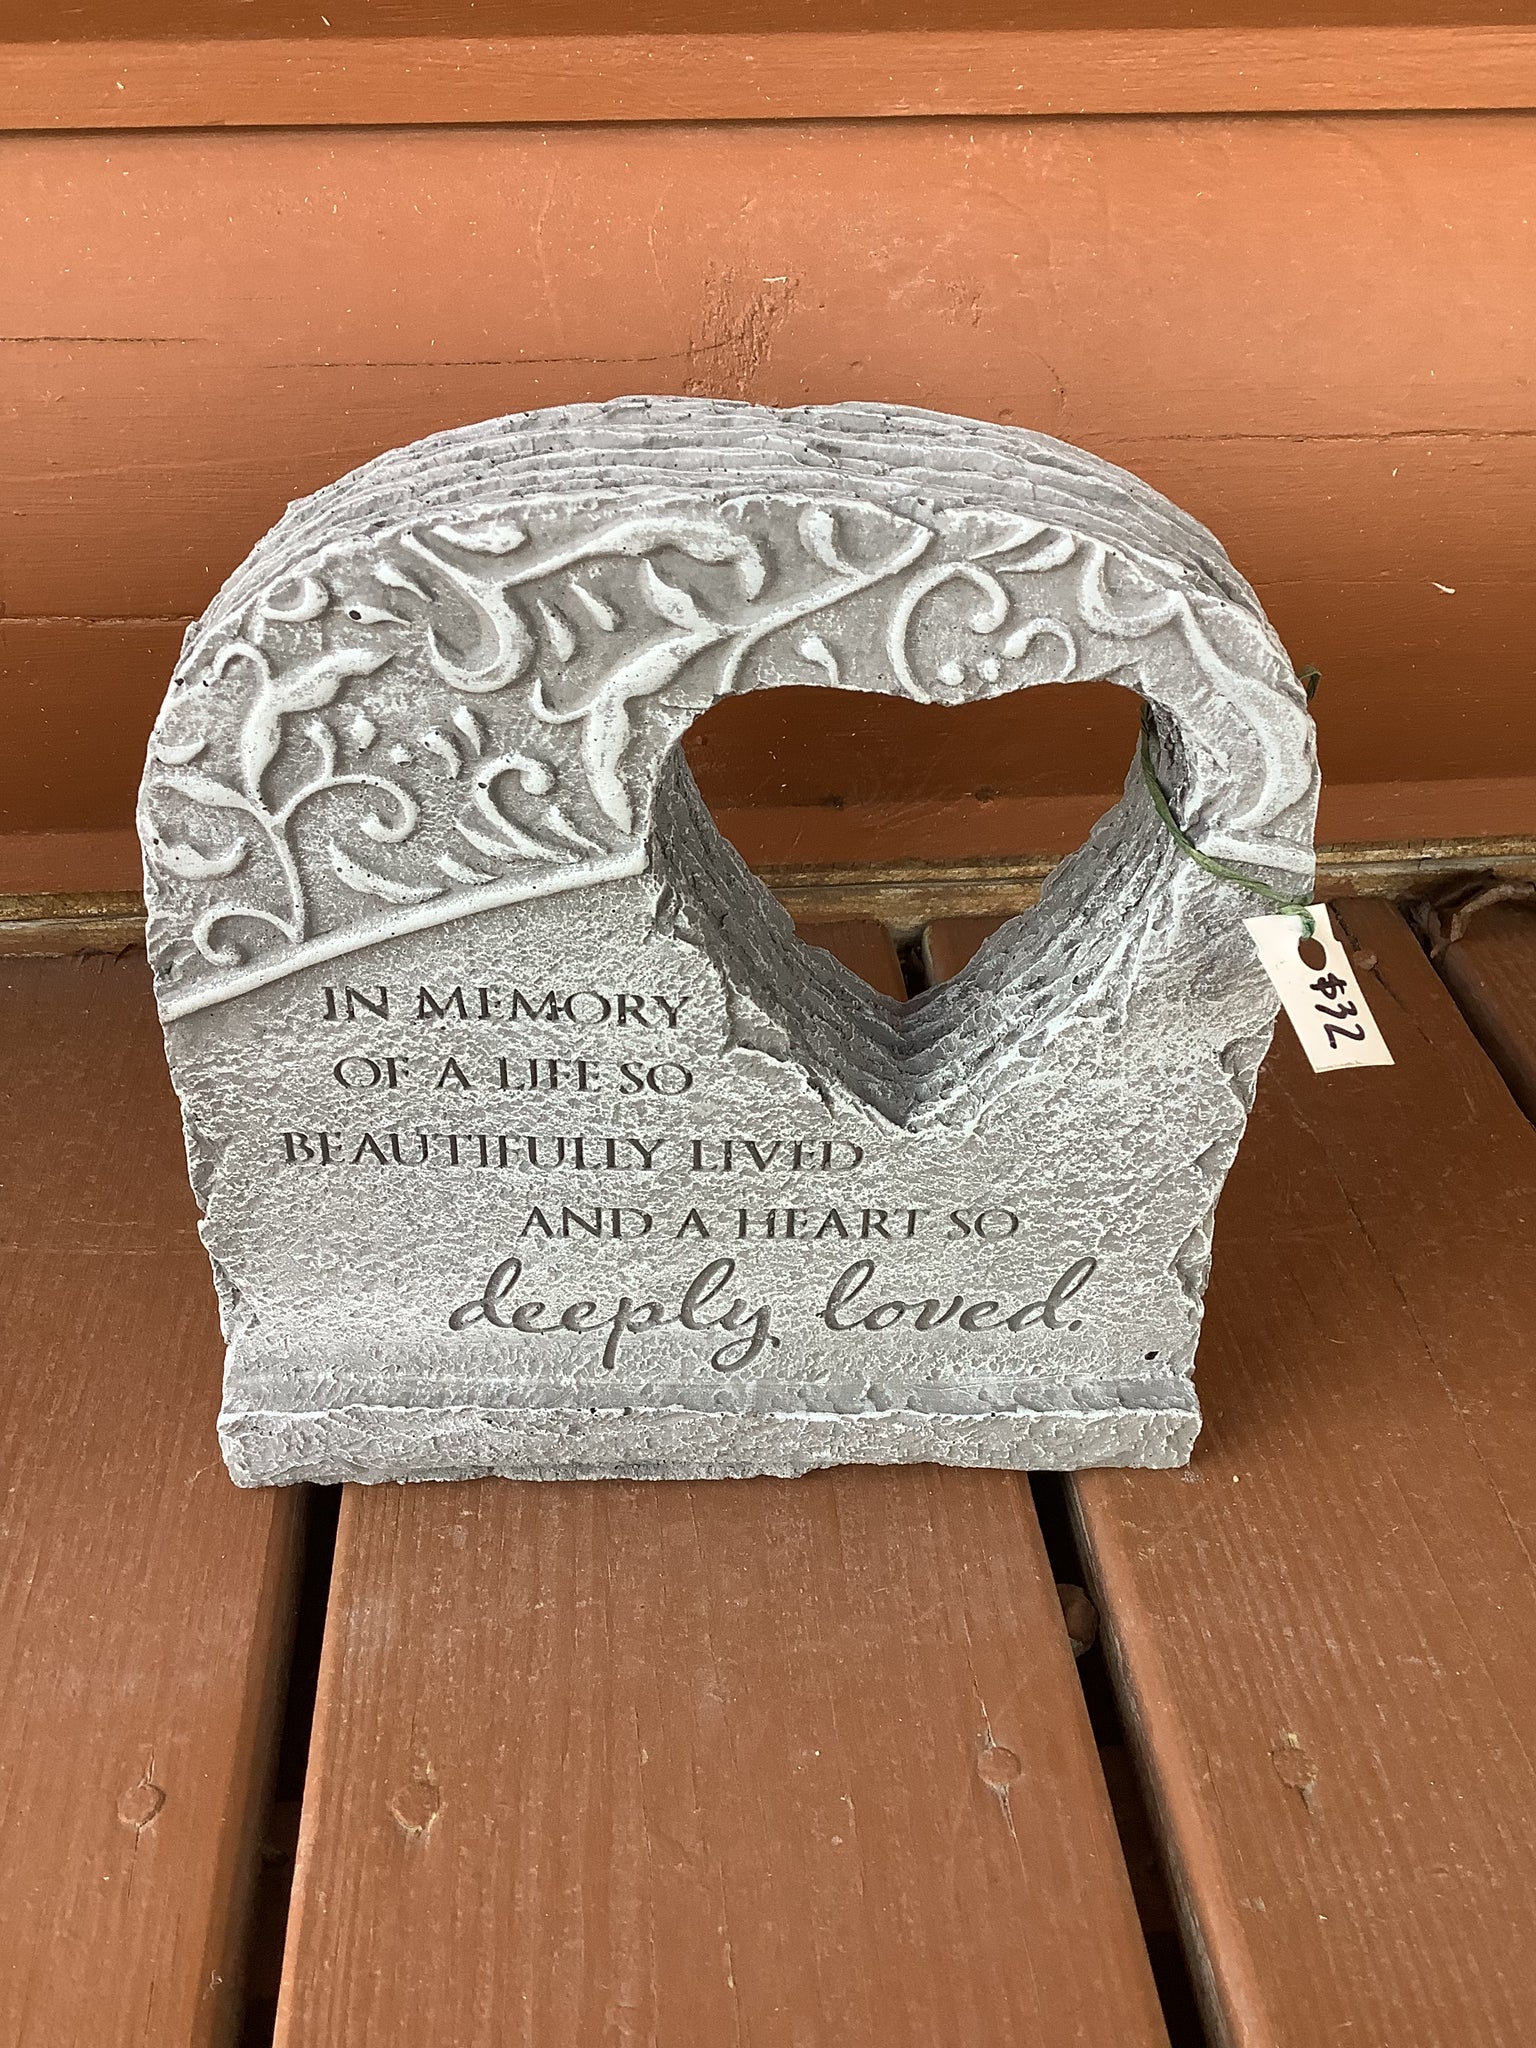 Concrete Memorial-Deeply loved